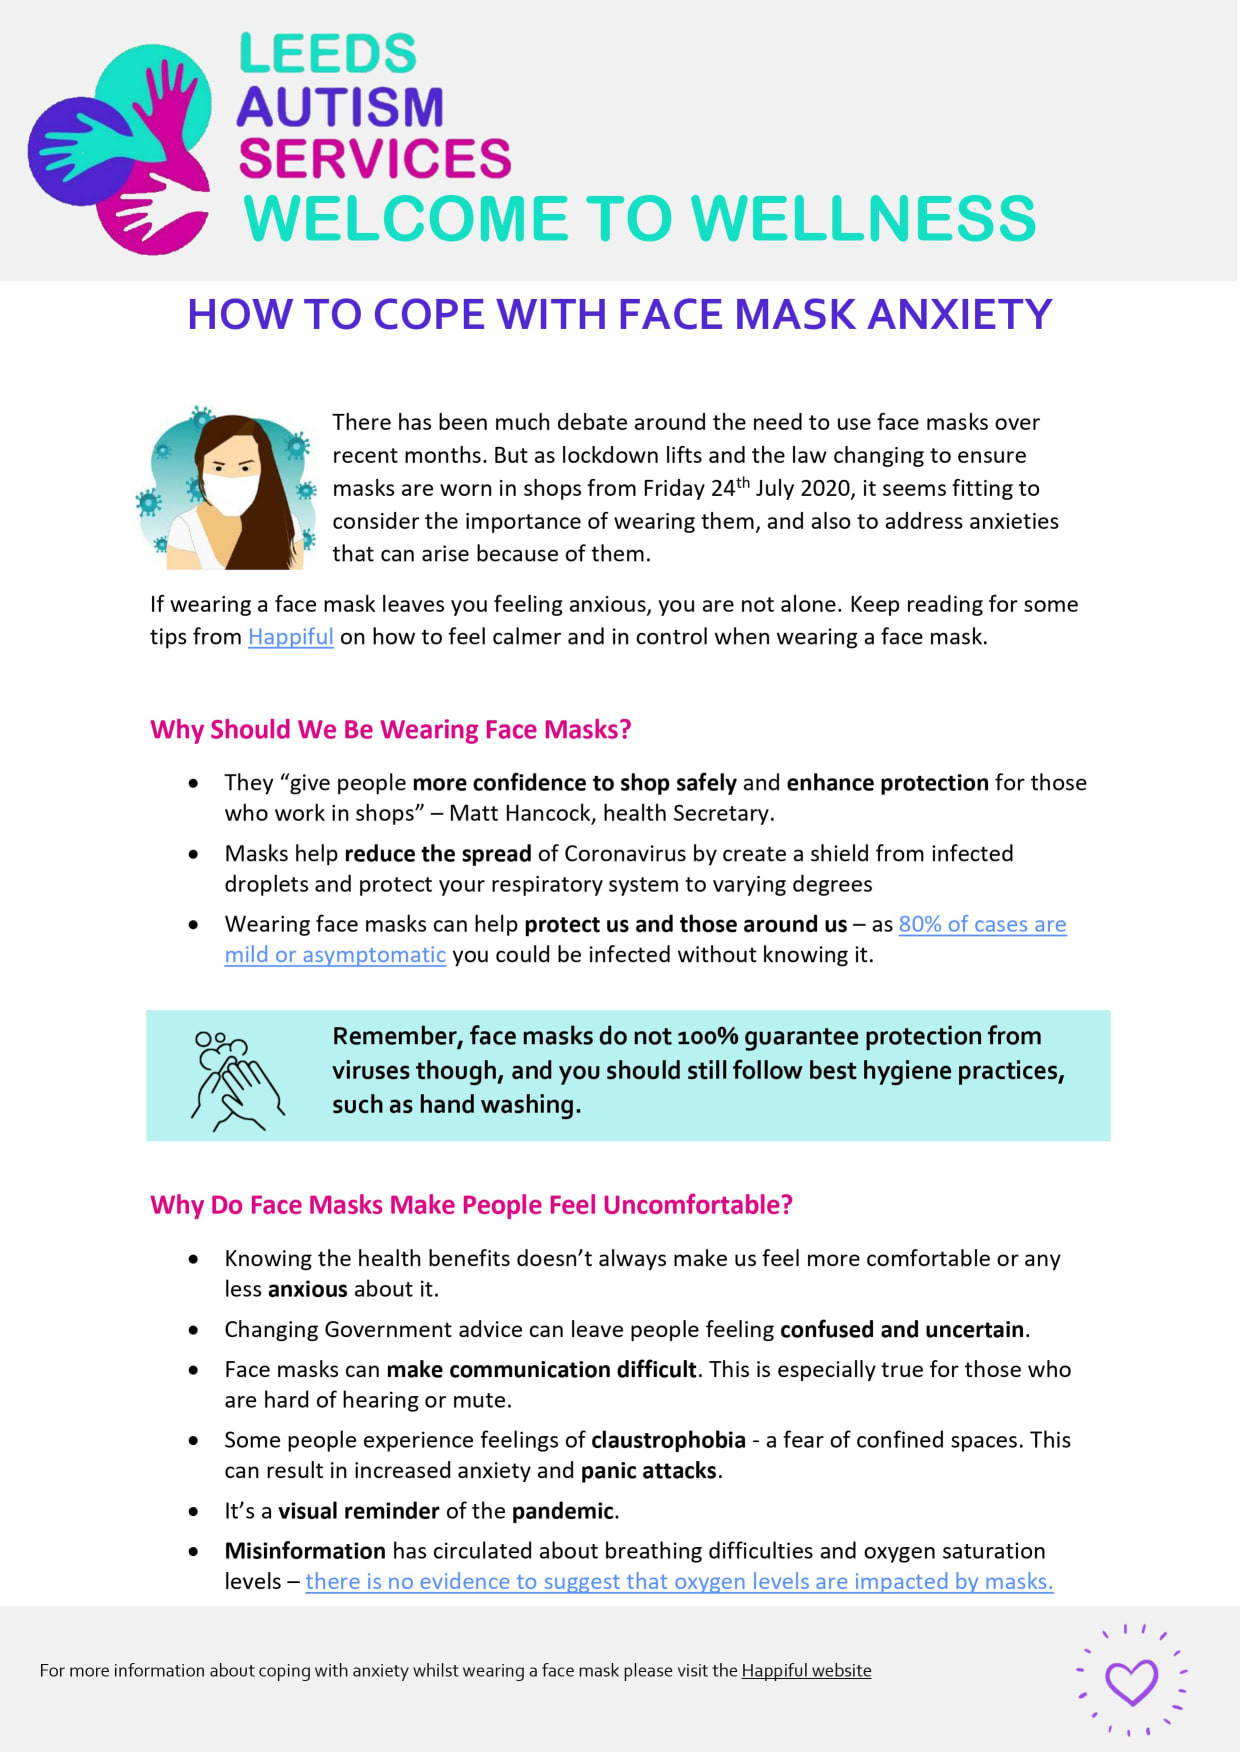 Coping with Face Mask Anxiety Page 1